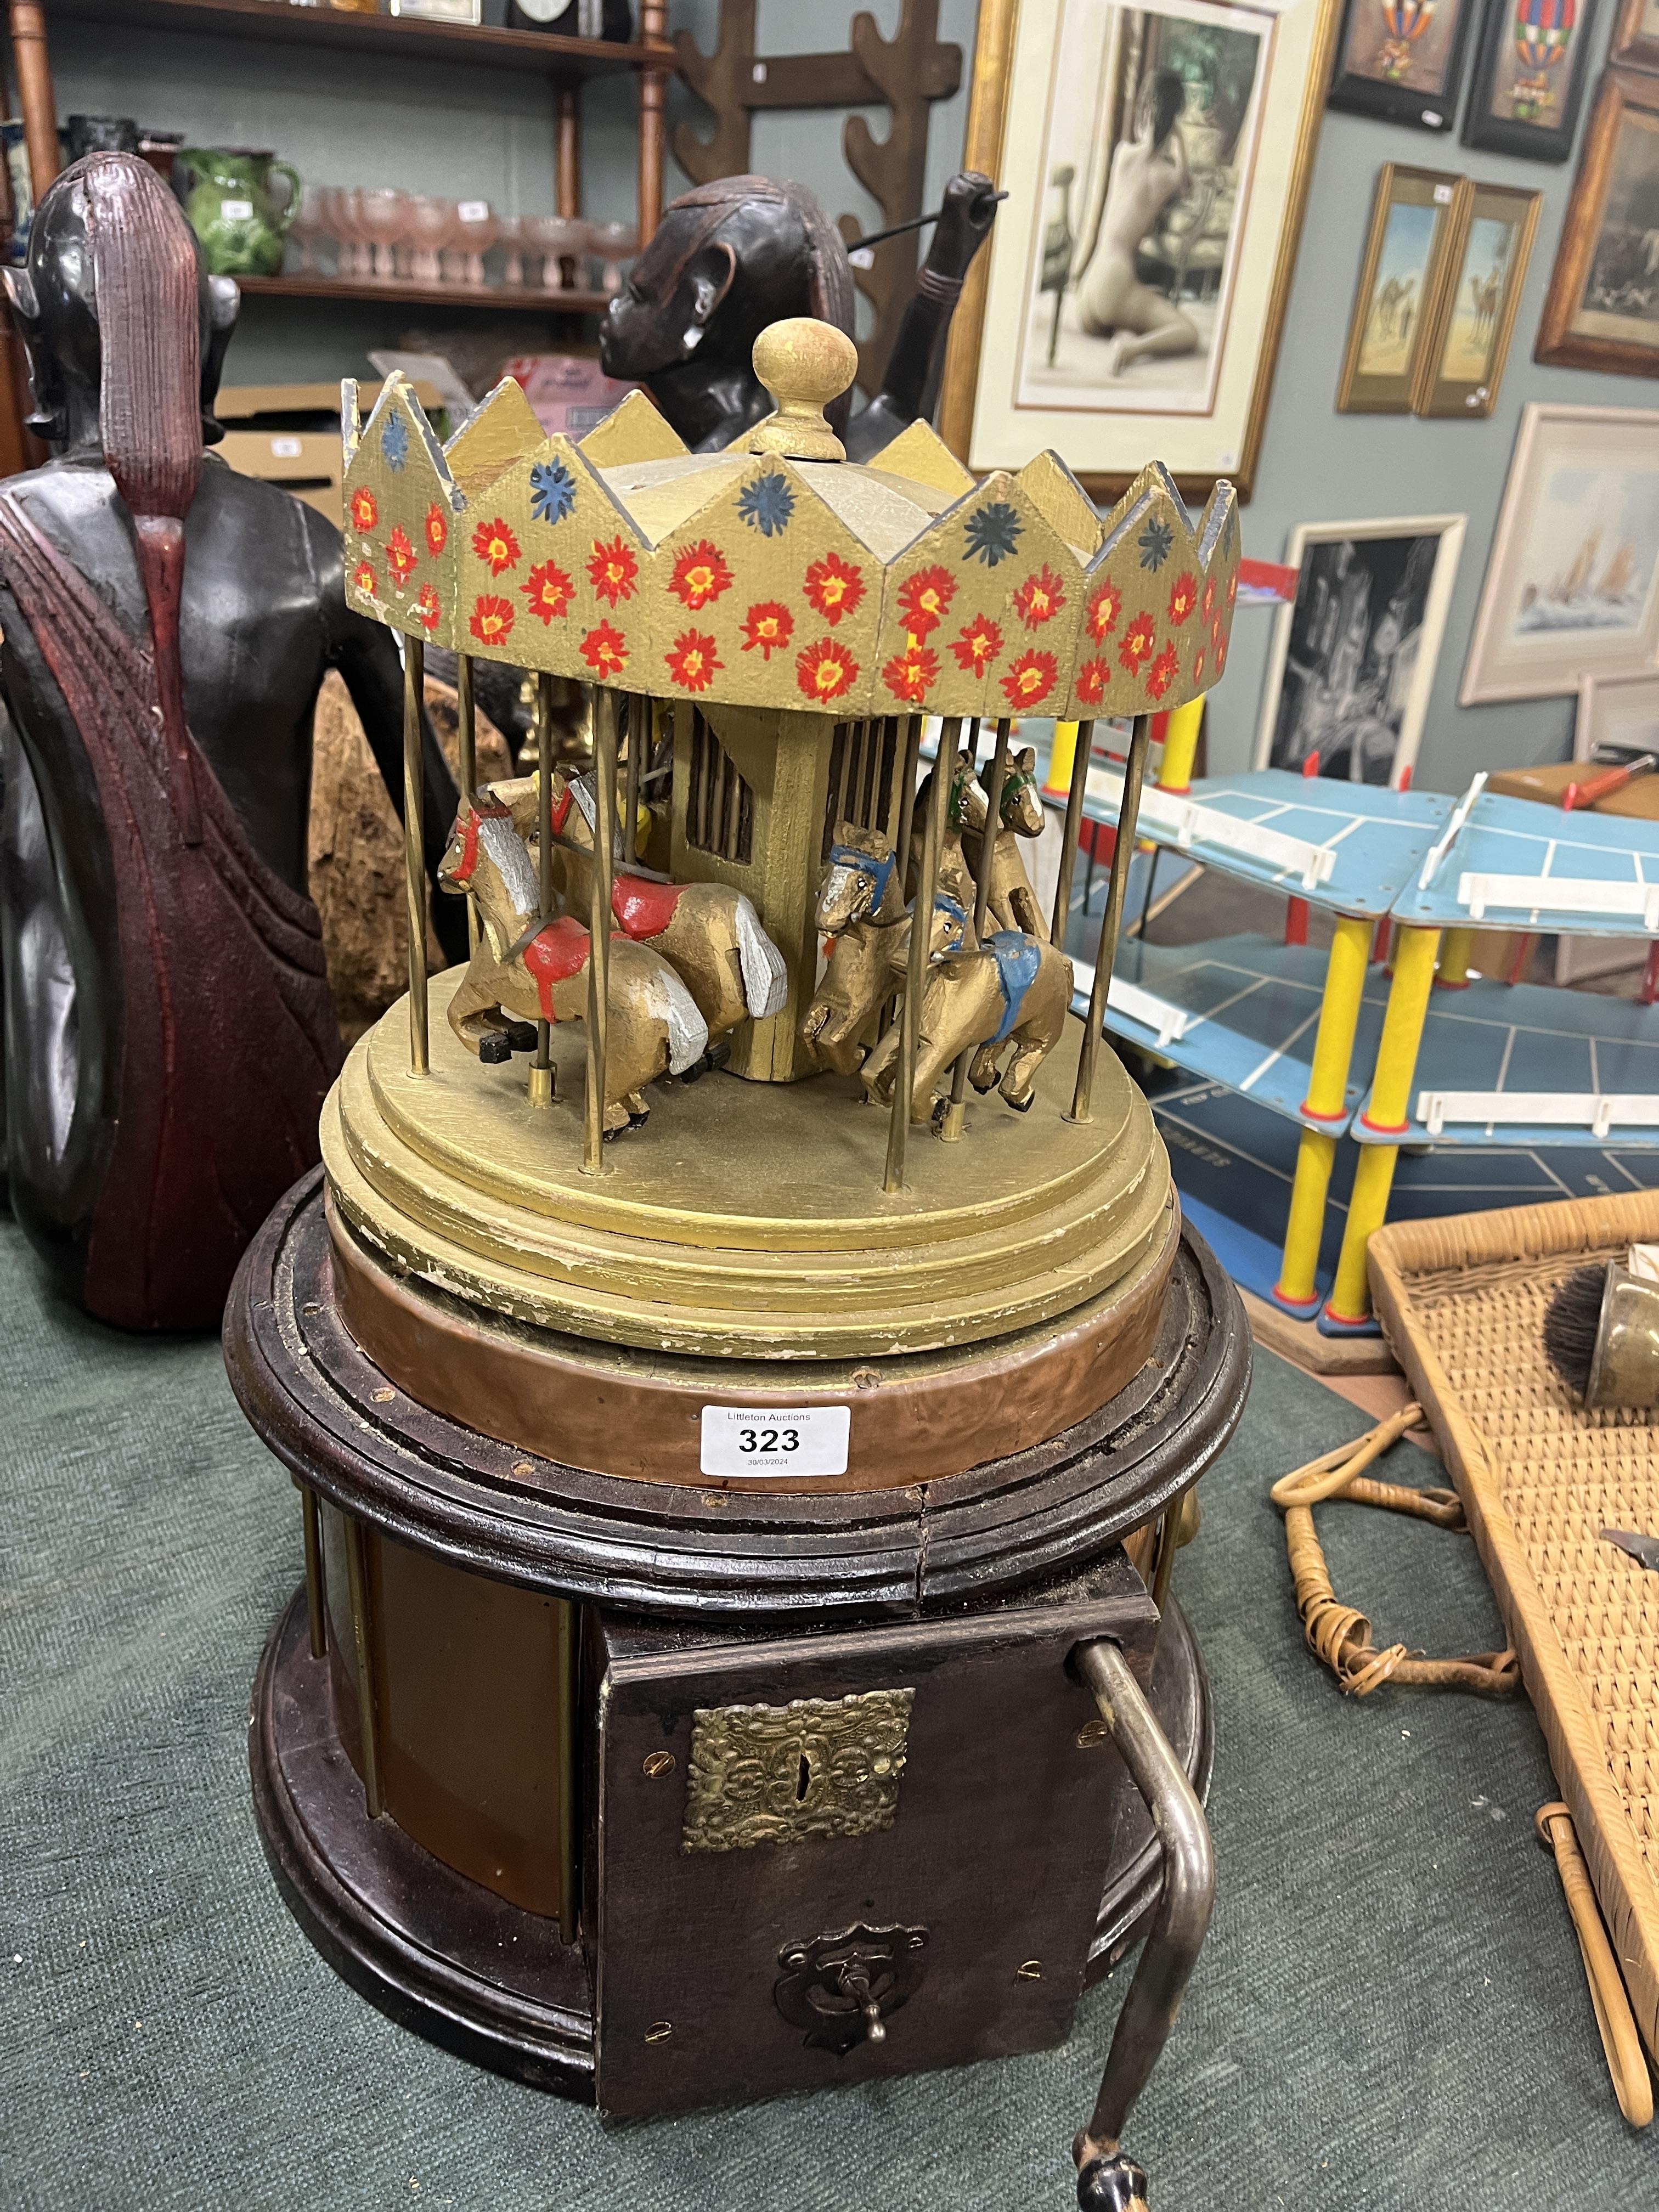 Scratch built model of a fairground carousel - Image 2 of 2